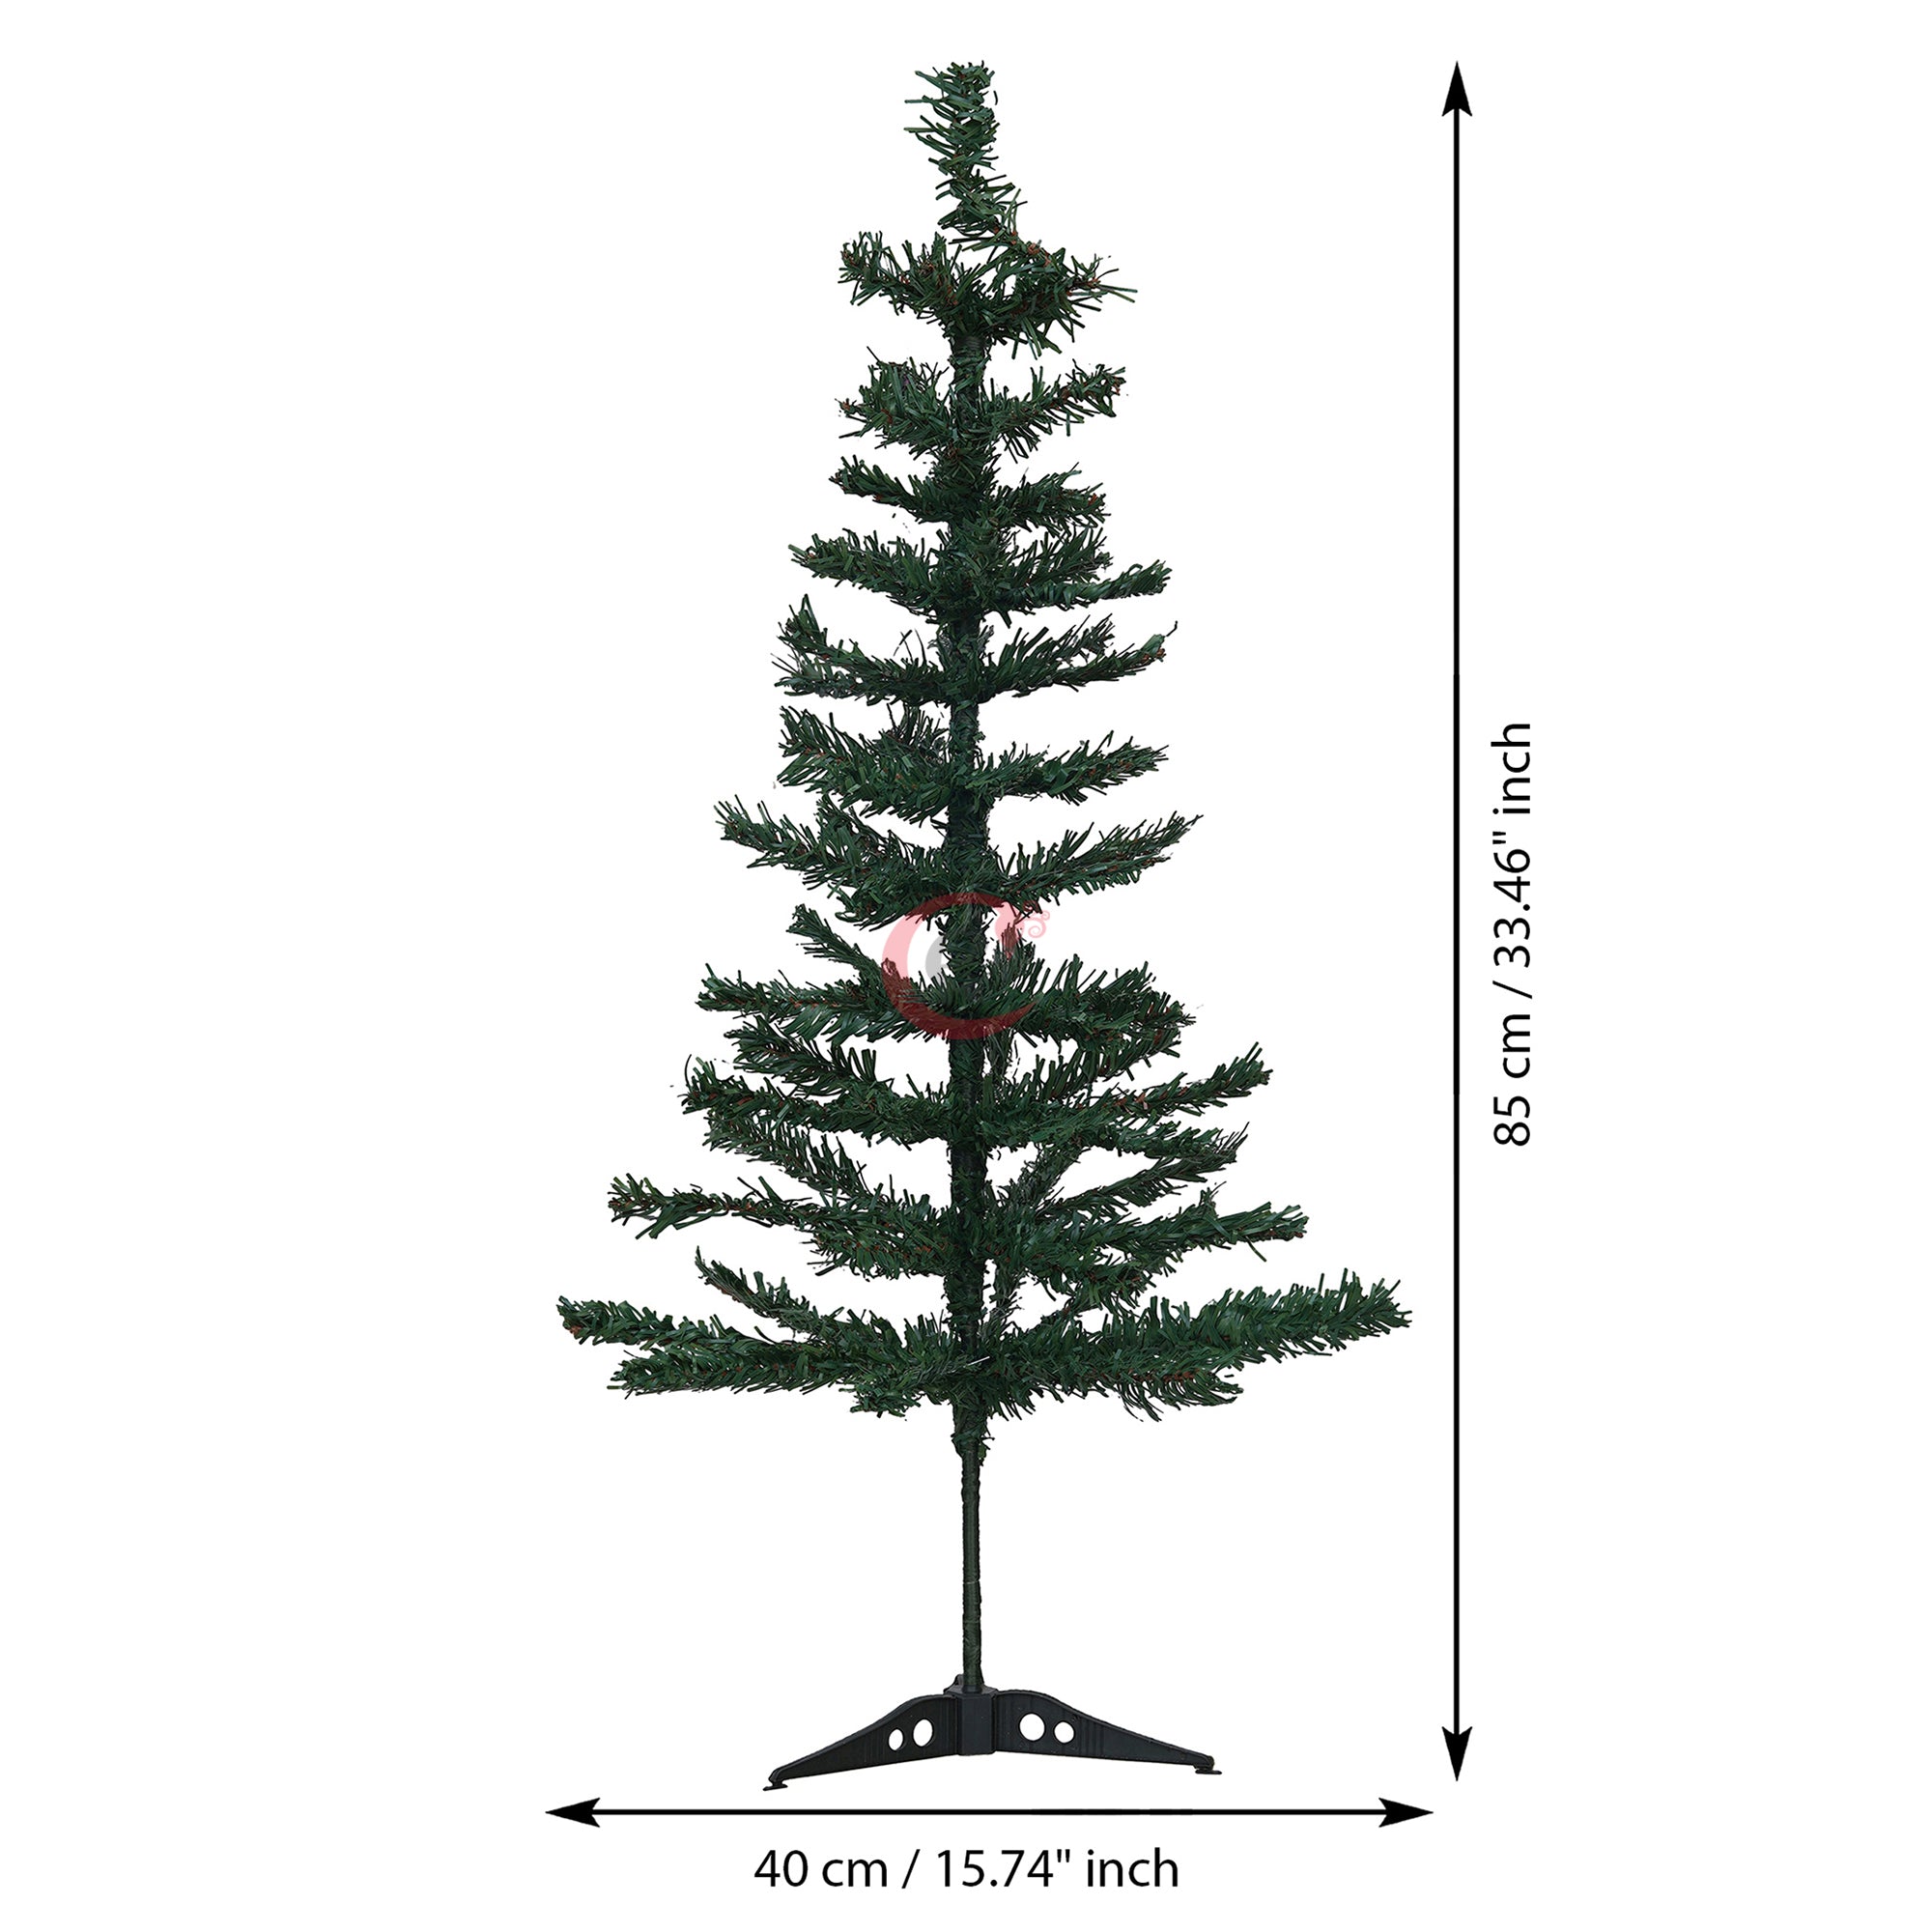 eCraftIndia 3 Feet Green Artificial Christmas Tree Xmas Pine Tree with Stand and 60 Christmas Decoration Ornaments Props - Merry Christmas Decoration Item for Home, Office, and Church 3